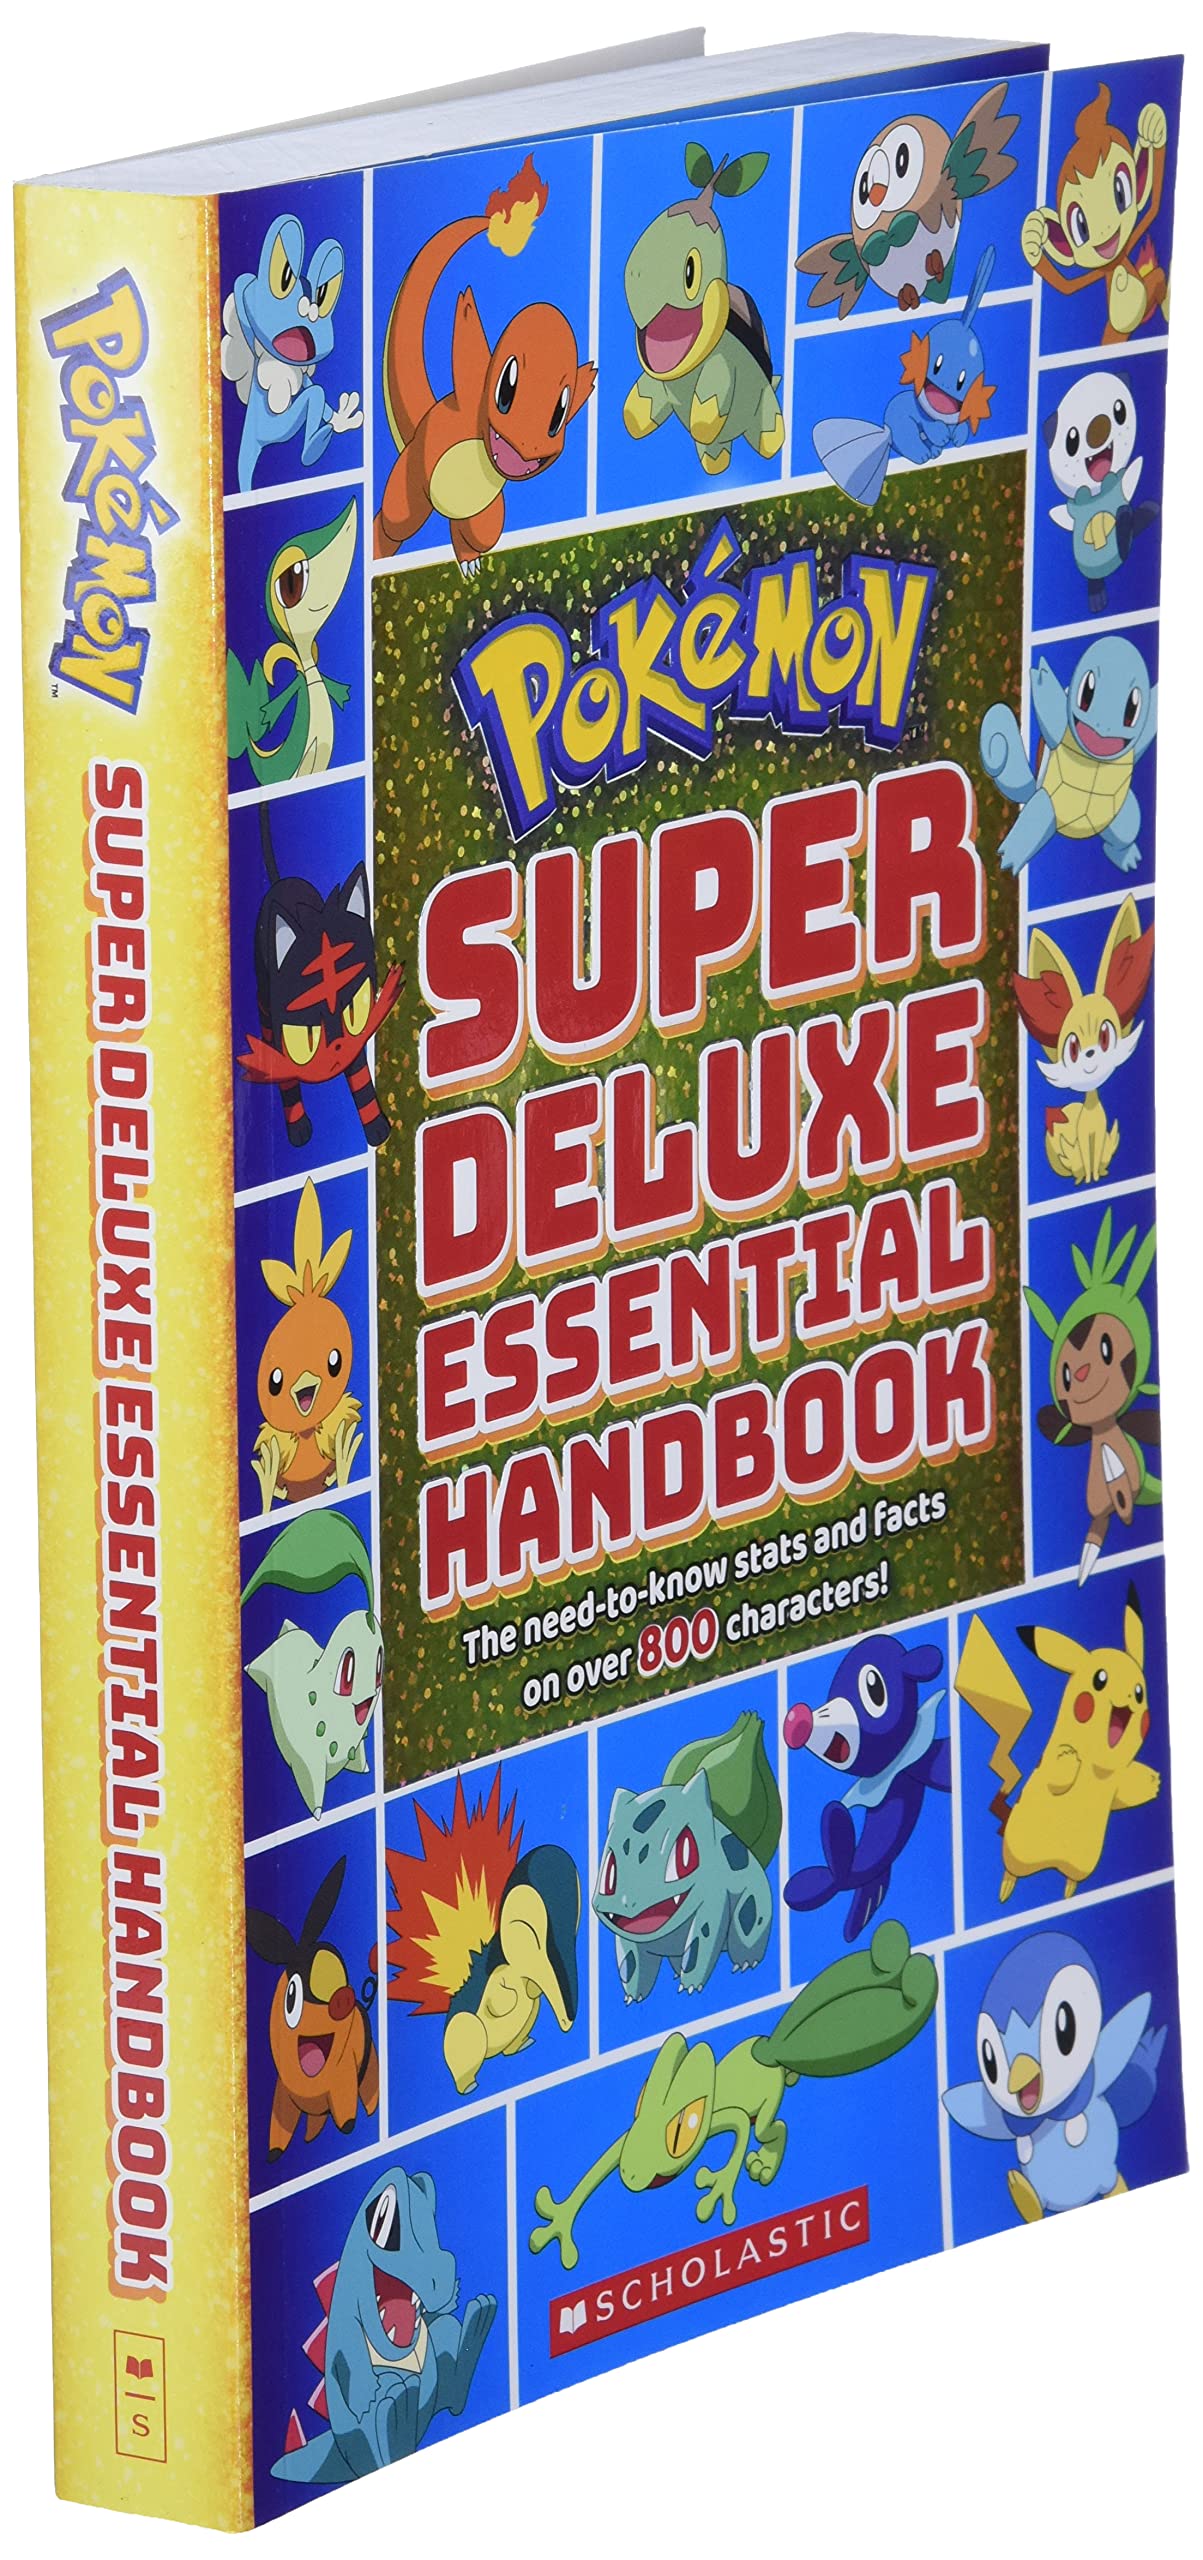 Super Deluxe Essential Handbook (Pokémon): The Need-to-Know Stats and Facts on Over 800 Characters